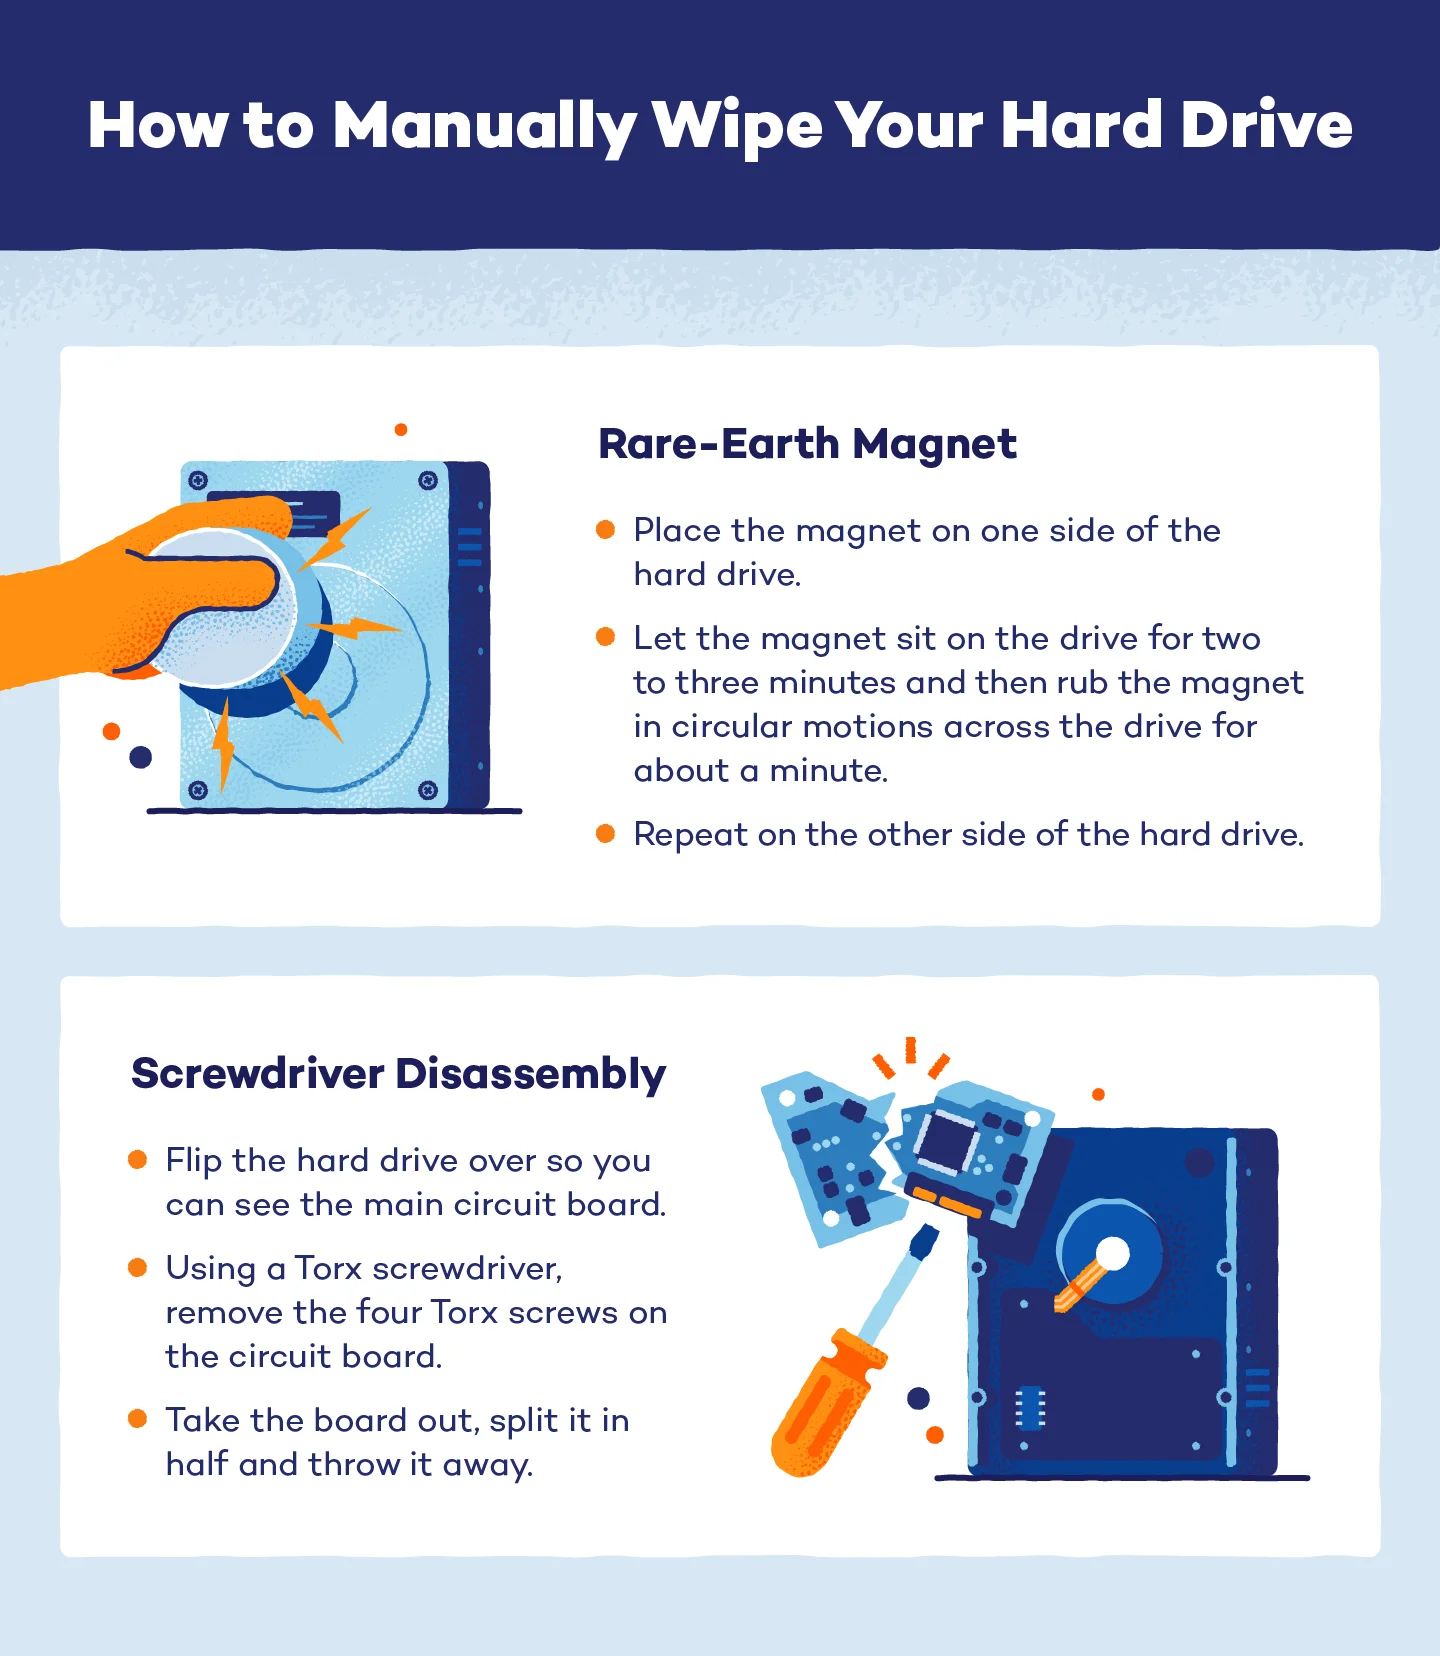 tips on how to manually wipe an hard drive